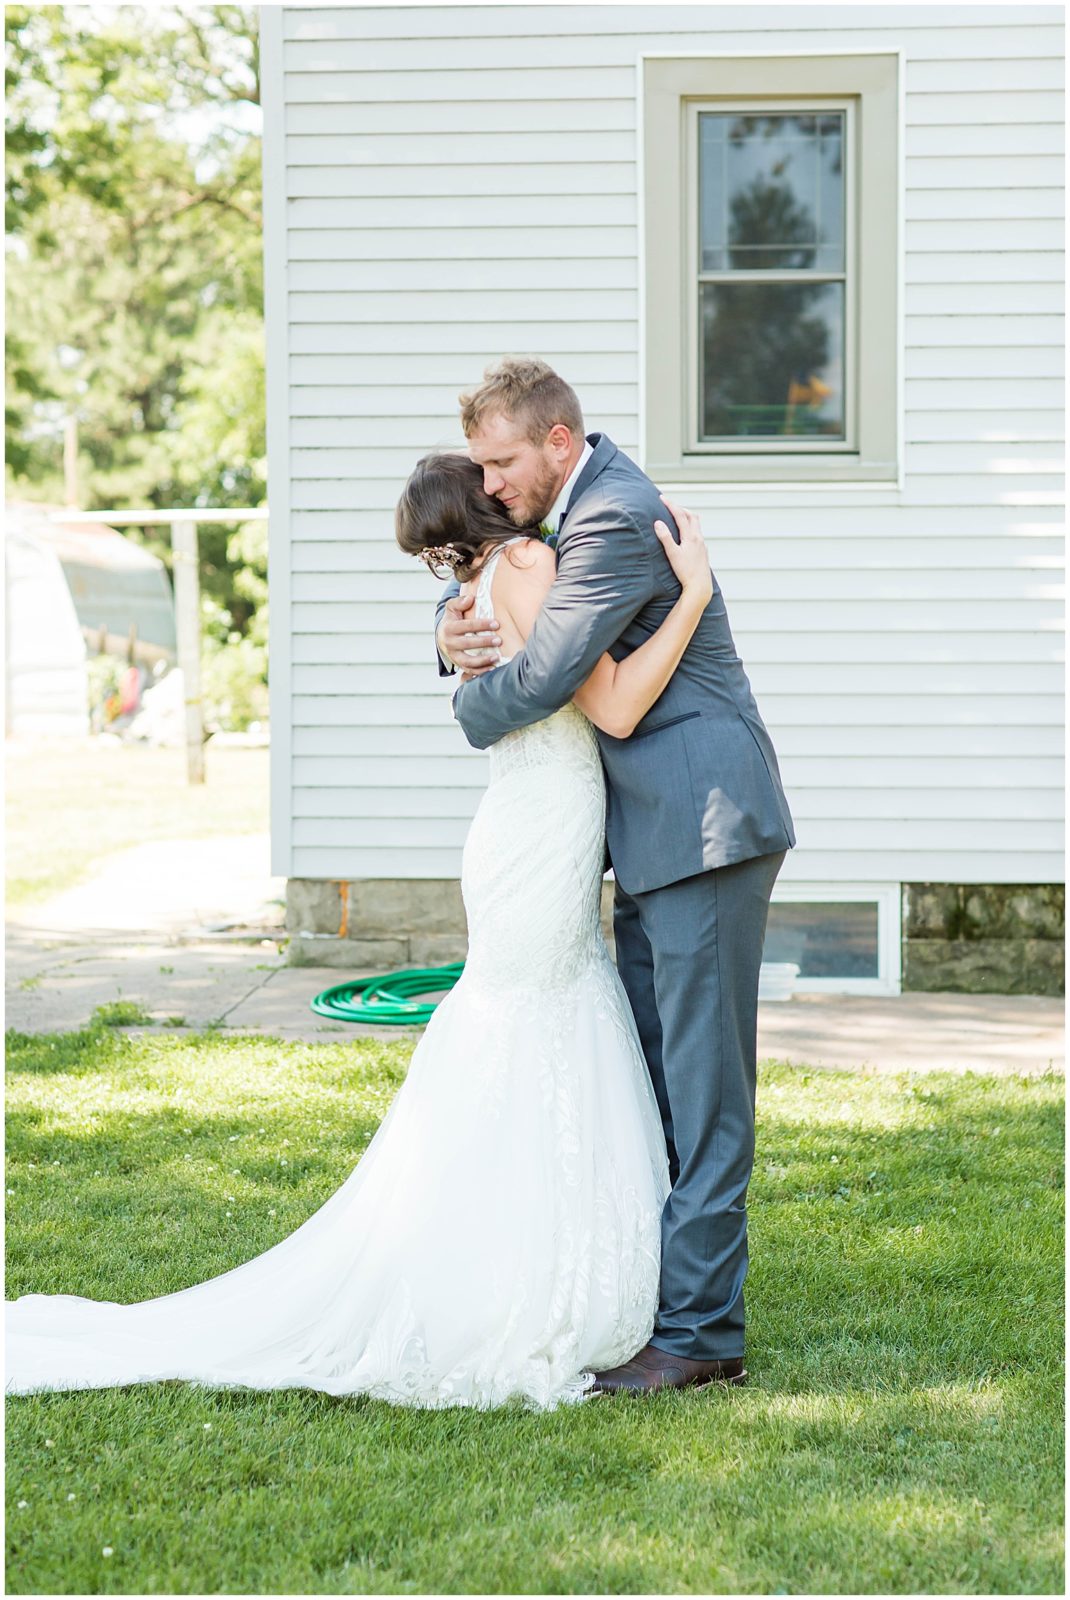 Bride and Groom First Look | Avalon Ballroom Wedding in Remsen, IA shot by Jessica Brees Photo & Video